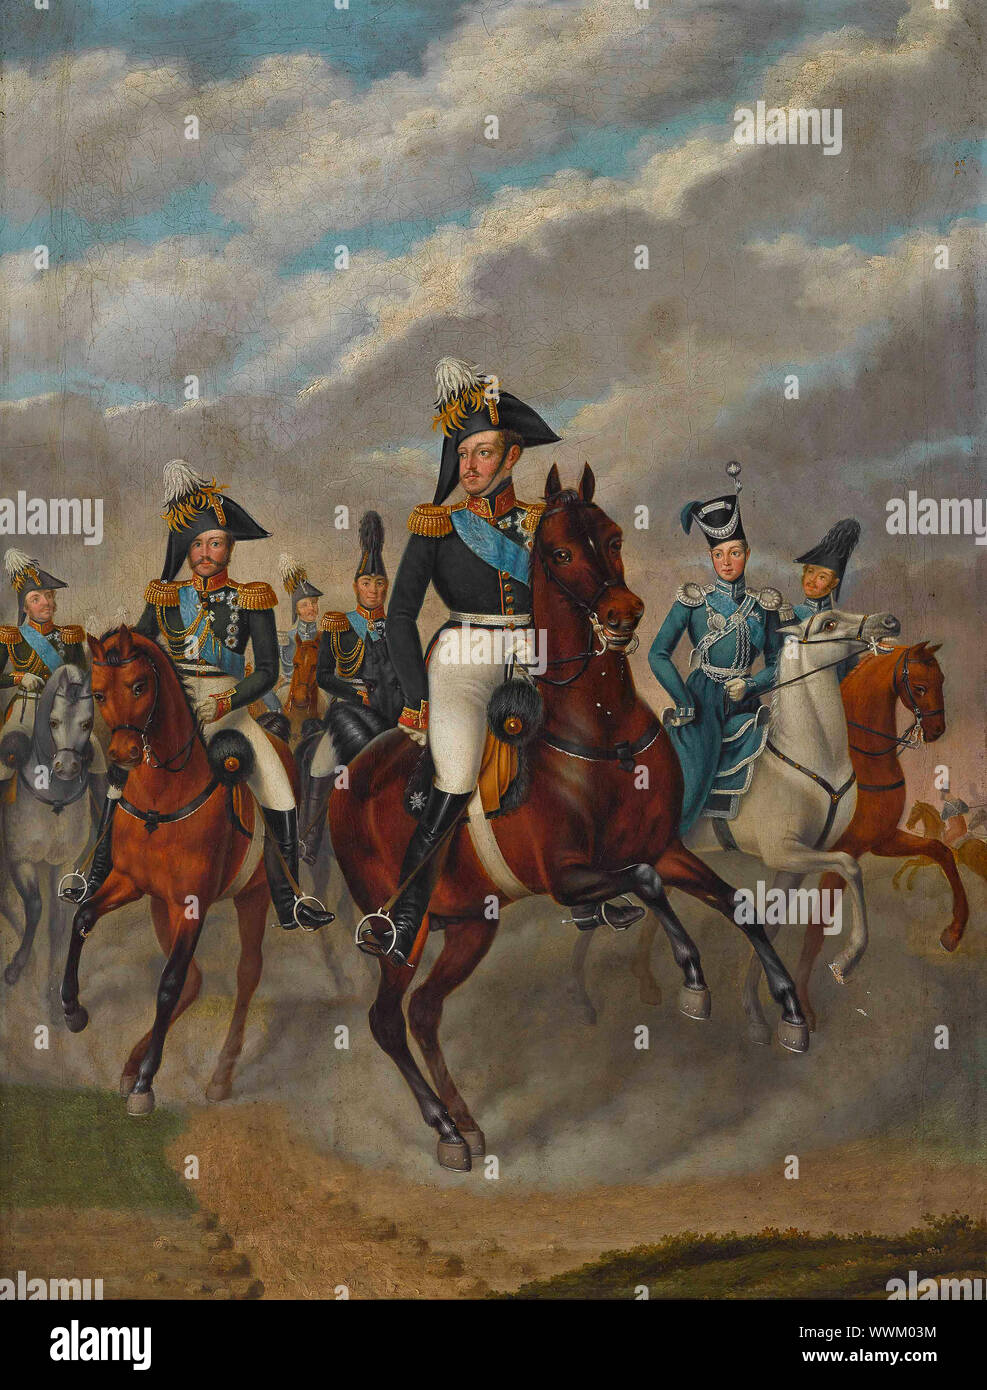 Tsar Nicholas I of Russia with Tsarevich Alexander and his Retinue. Private Collection. Stock Photo